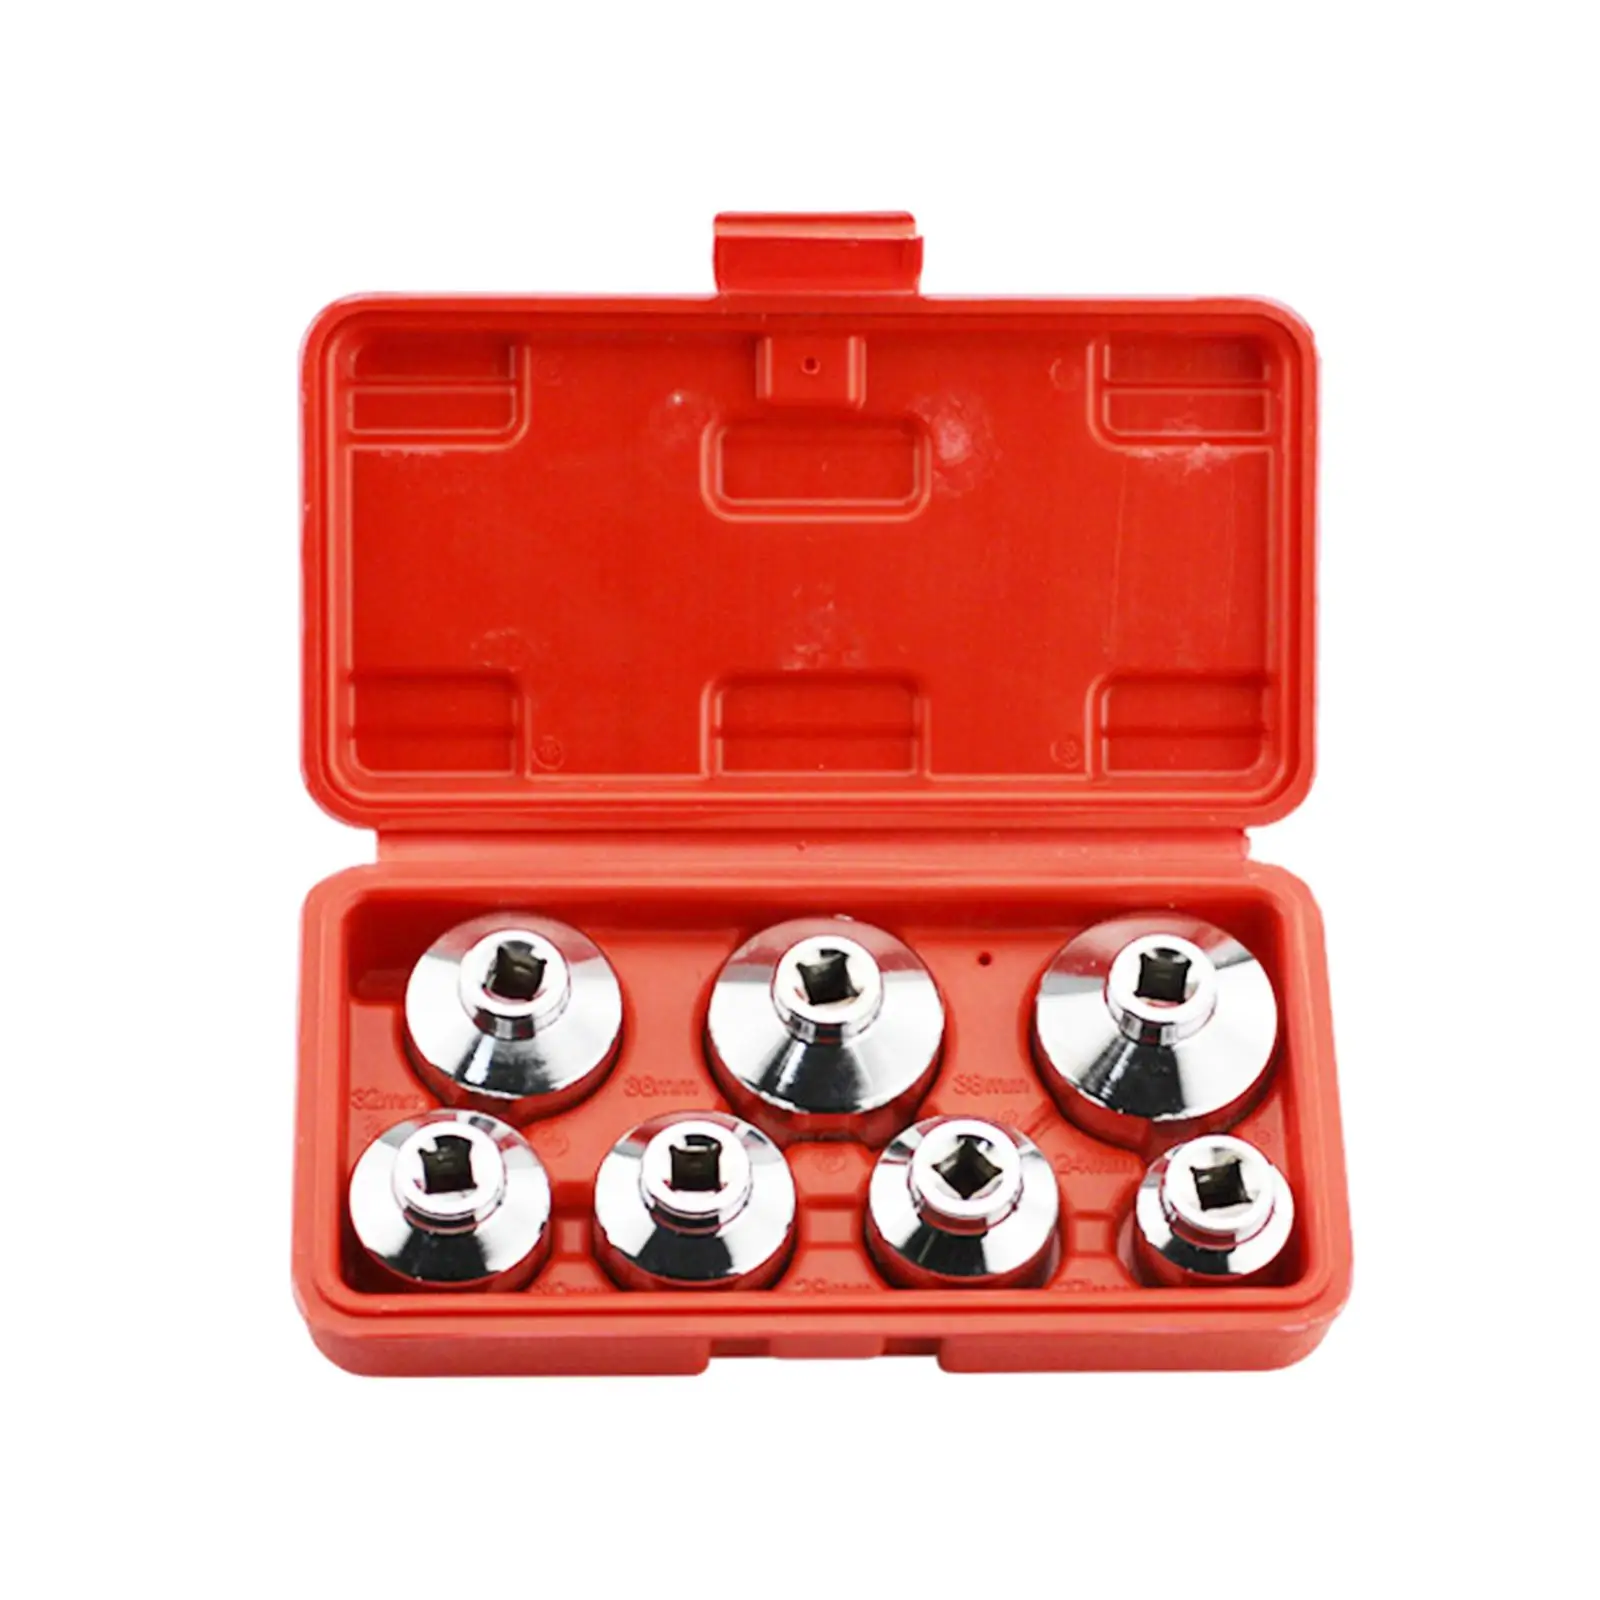 7Pcs Oil Filter Wrench Socket Set 3/8-inch Drive Car Accessories Disassembly Tool Sturdy Fuel Filter Cap Removal Tool Set